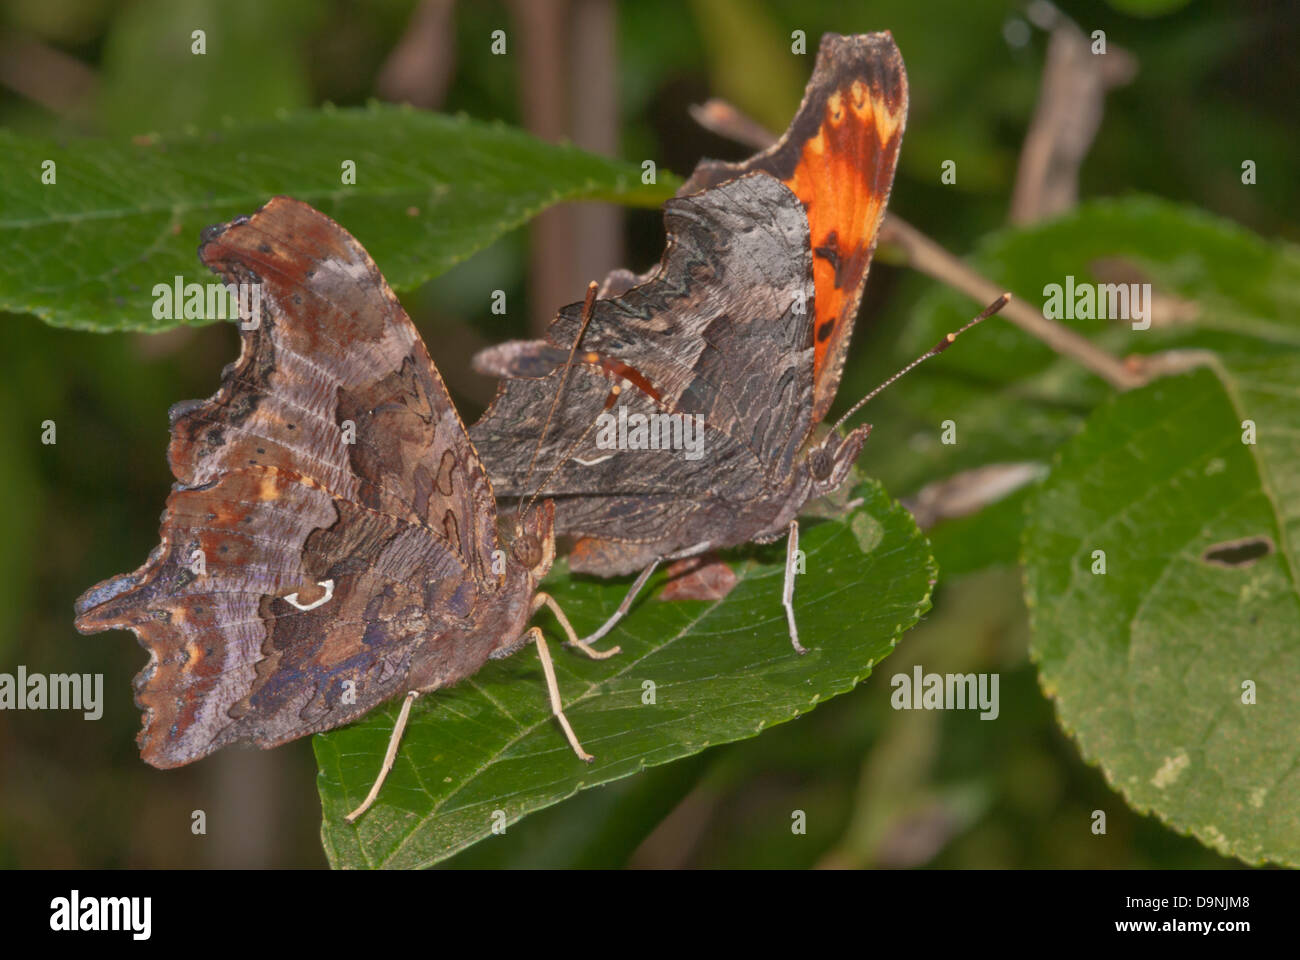 A pair of eastern comma butterflies (Polygonia comma) perched on a leaf, Brockville, Ontario Stock Photo